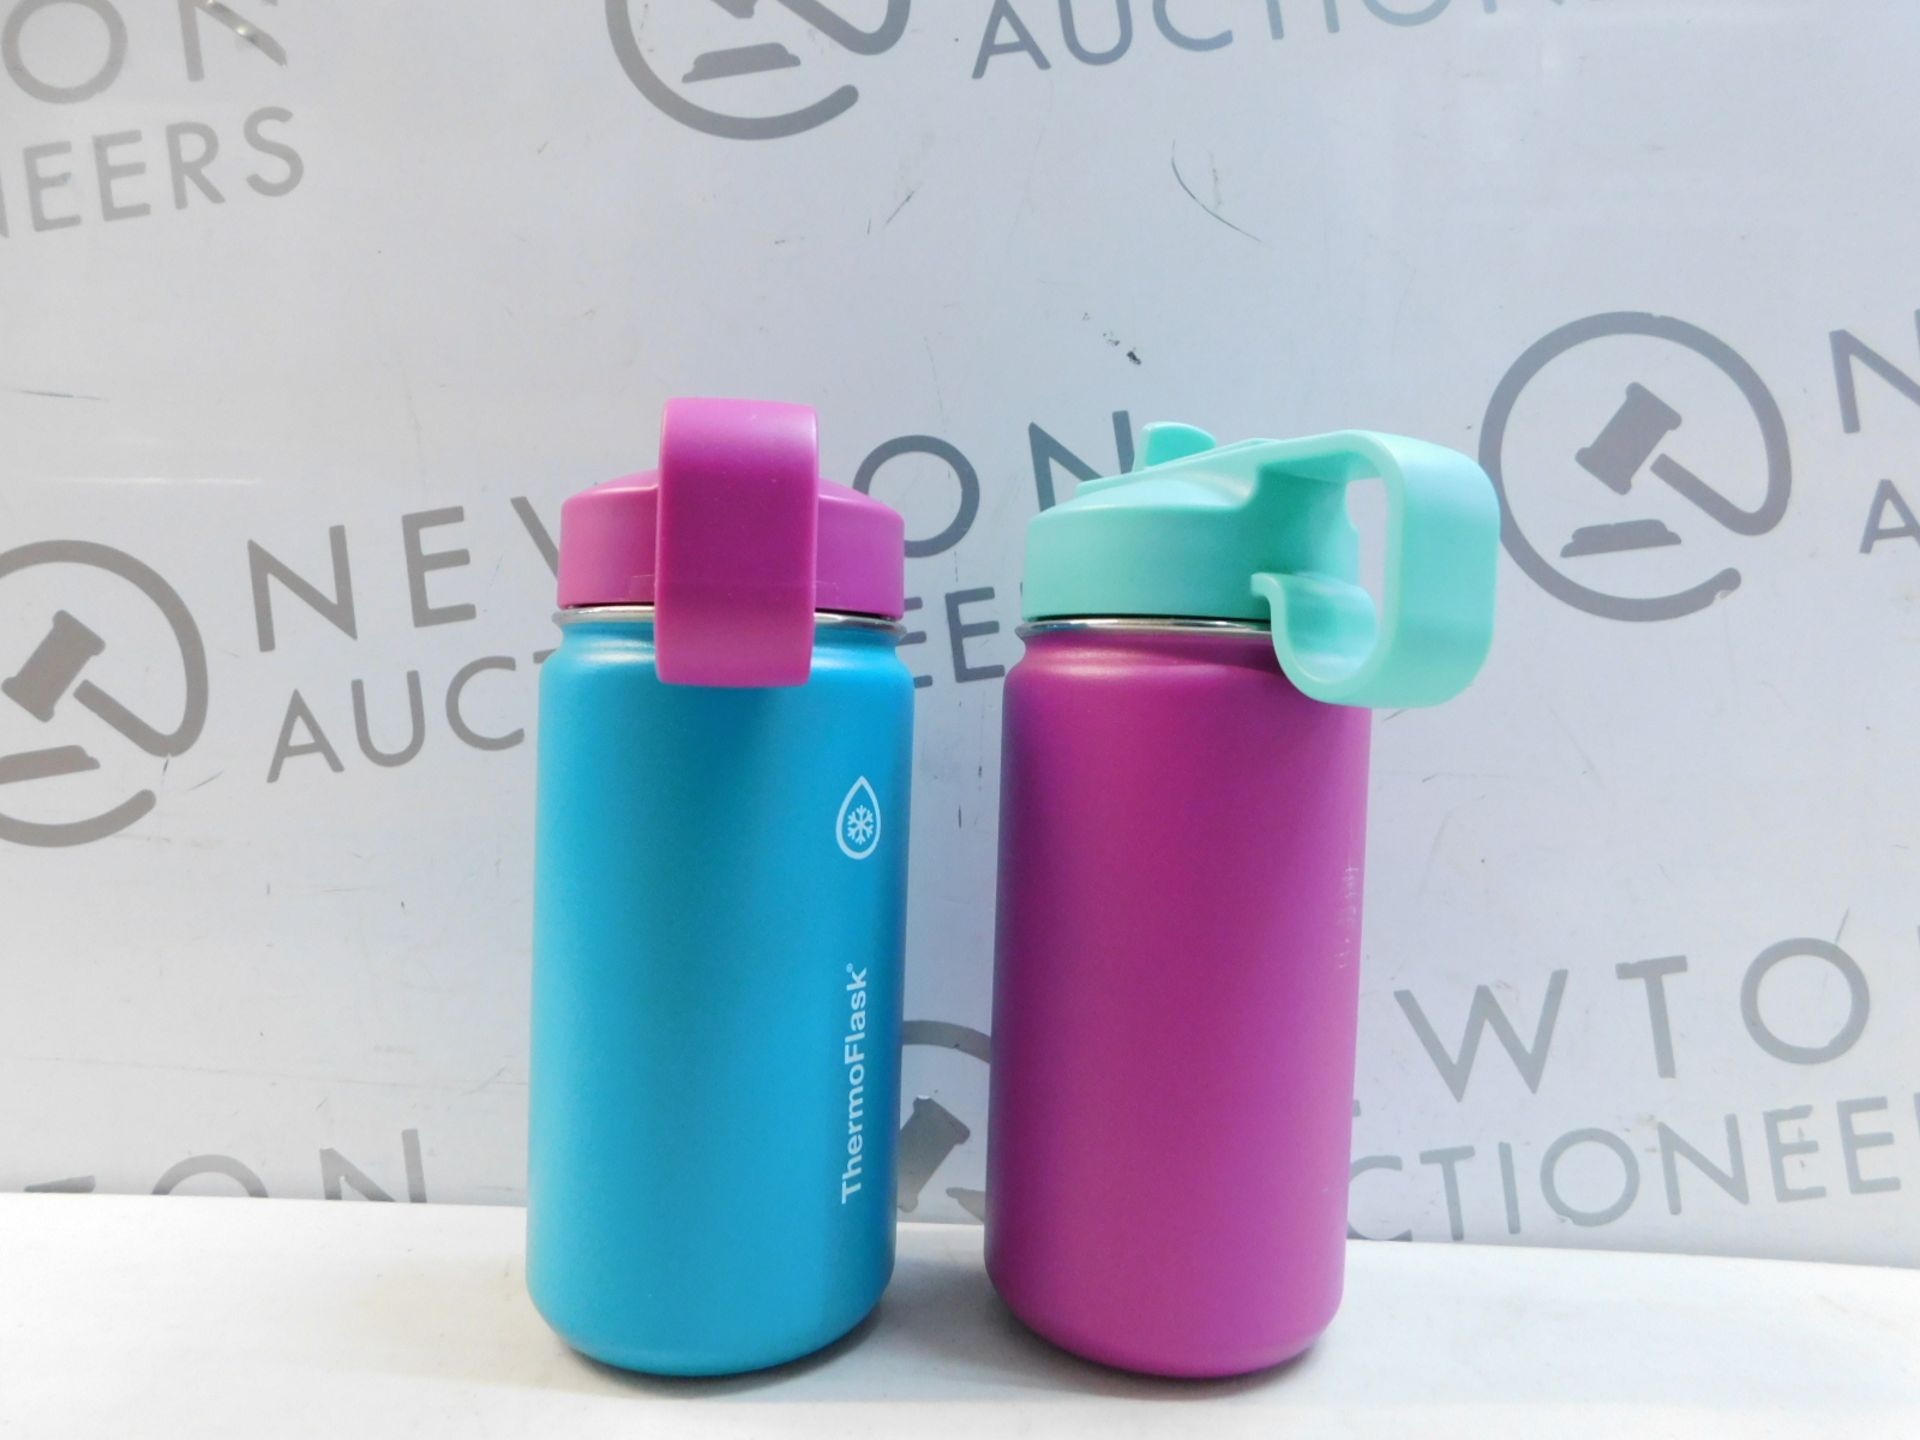 1 SET OF 2 THERMOFLASK KIDS DOUBLE WALL VACUUM INSULATED STAINLESS STEEL WATER BOTTLES RRP Â£29.99